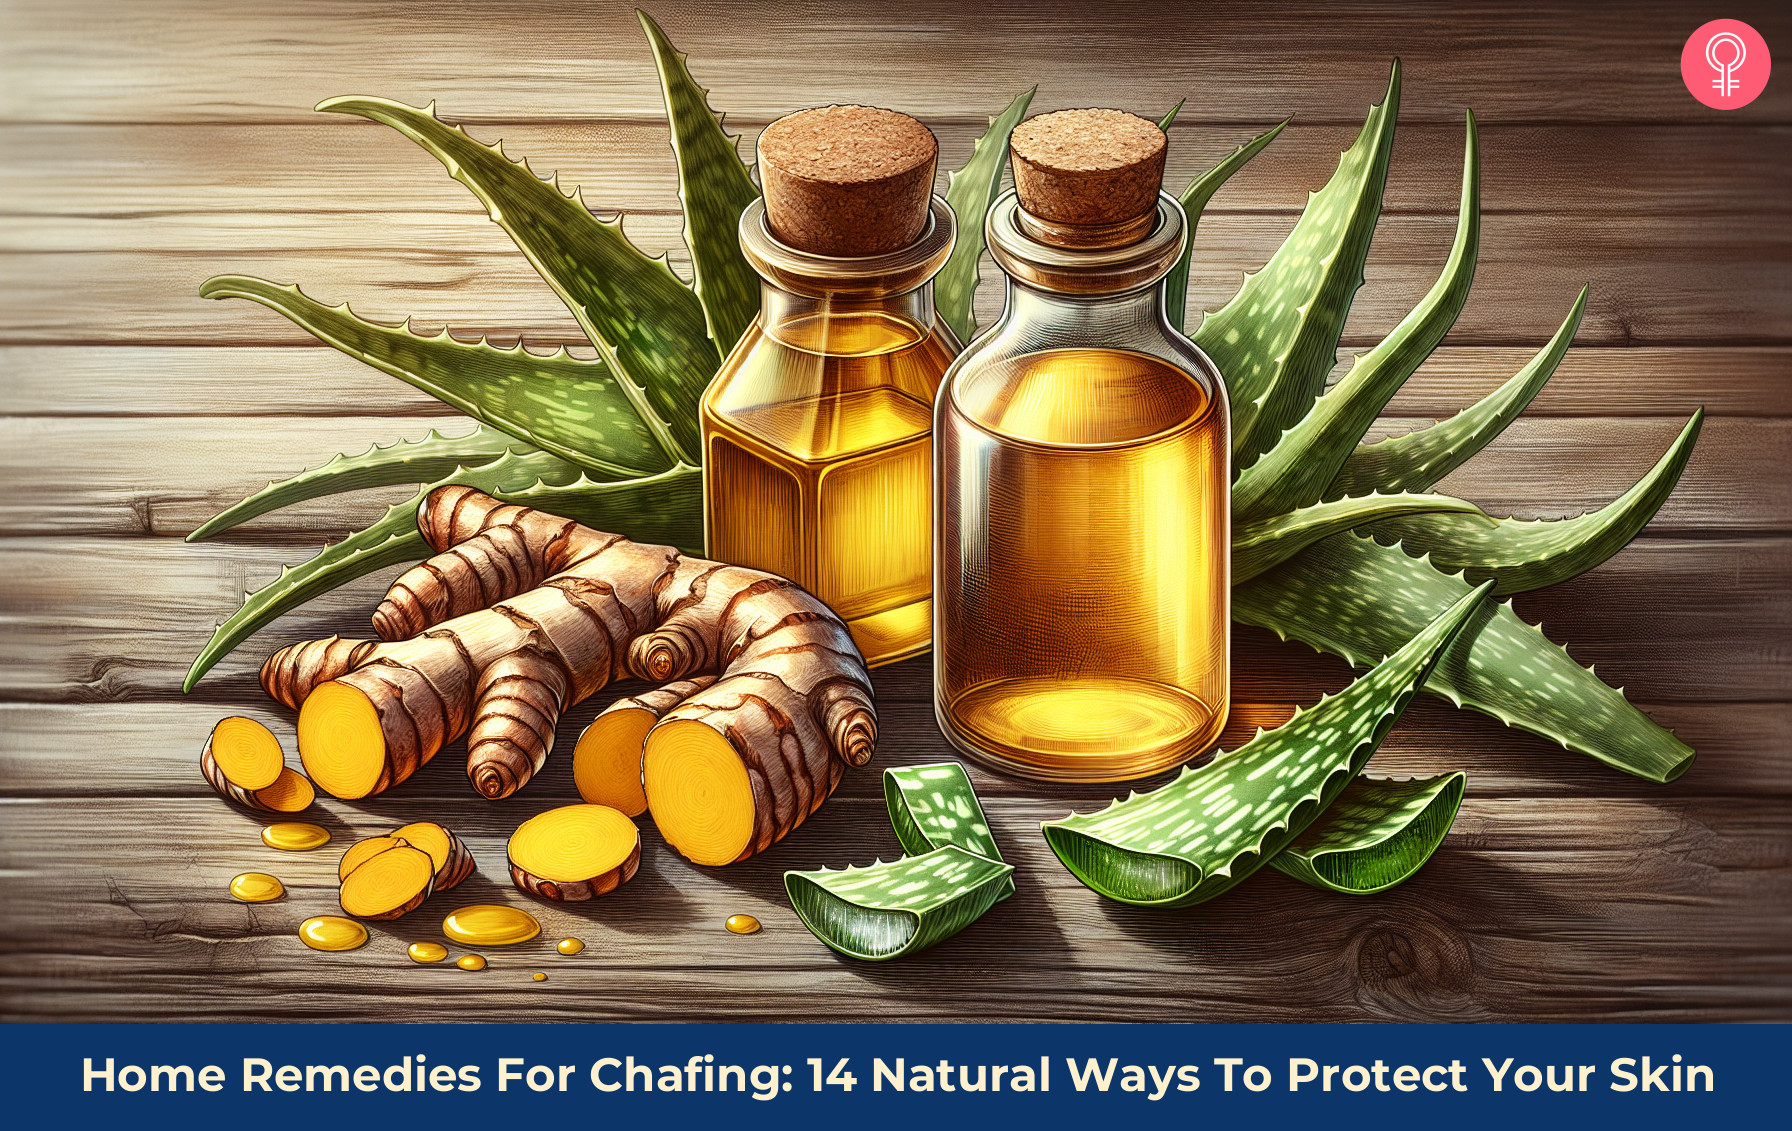 Home Remedies For Chafing: 14 Natural Ways To Protect Your Skin